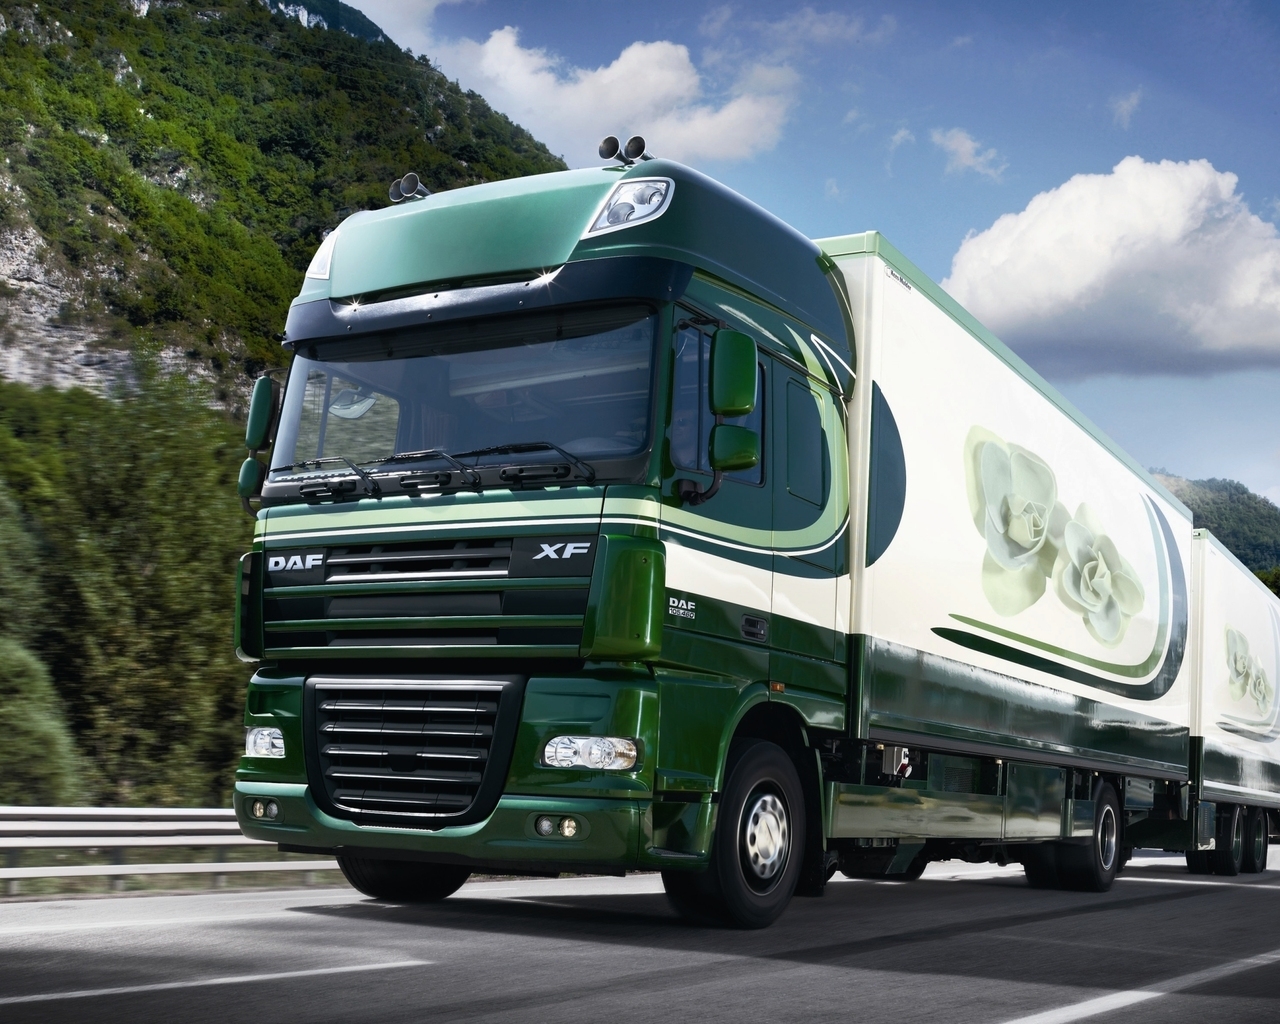 DAF XF 105 Truck for 1280 x 1024 resolution